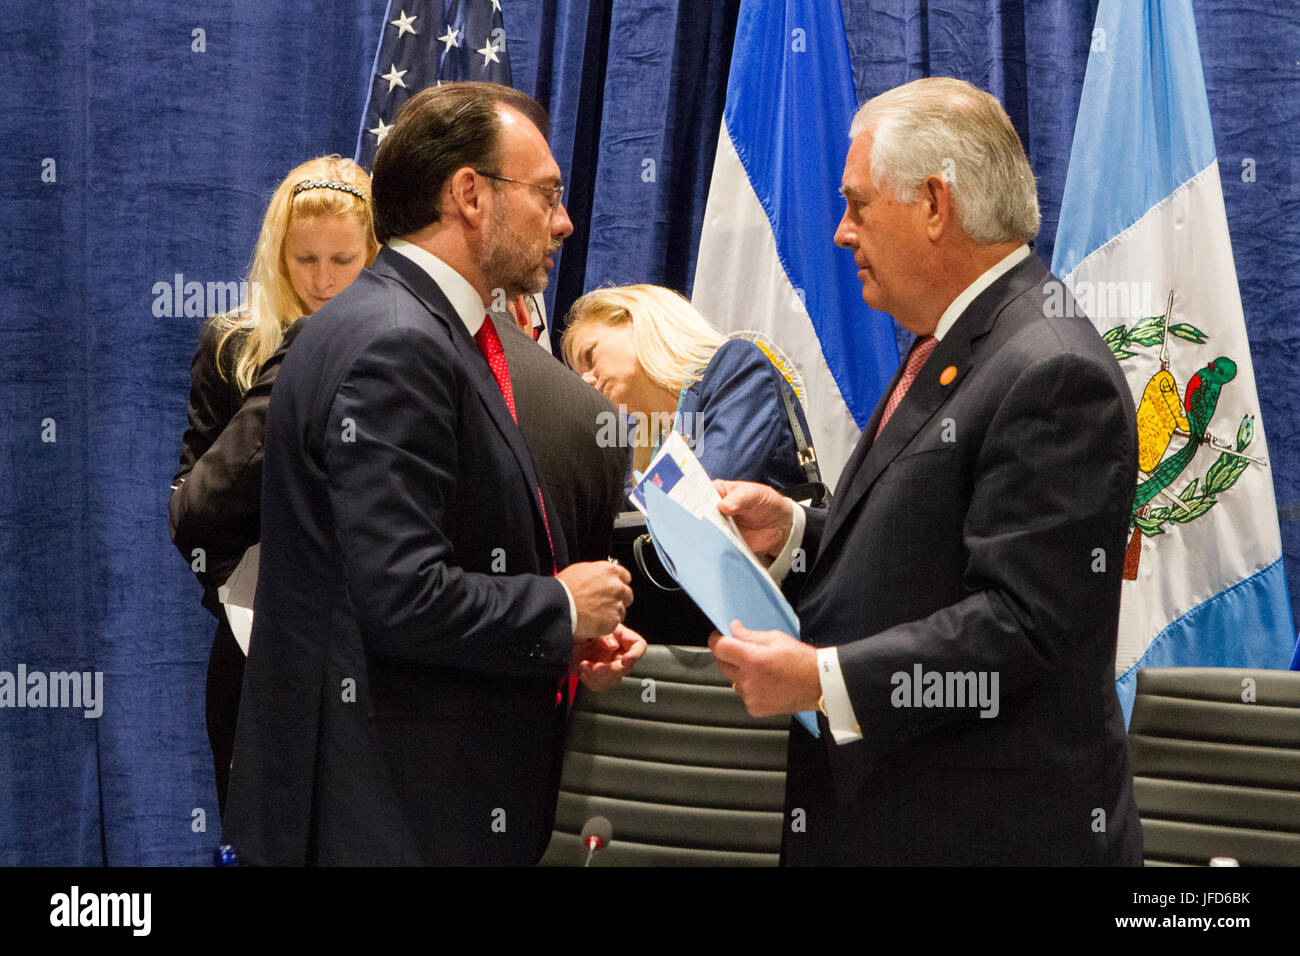 U.S. Secretary of State Rex Tillerson chats with Mexican Foreign Secretary Luis Videgaray on the margins of the Conference on Prosperity and Security in Central America, at Florida International University in Miami, Florida, on June 15, 2017. Stock Photo